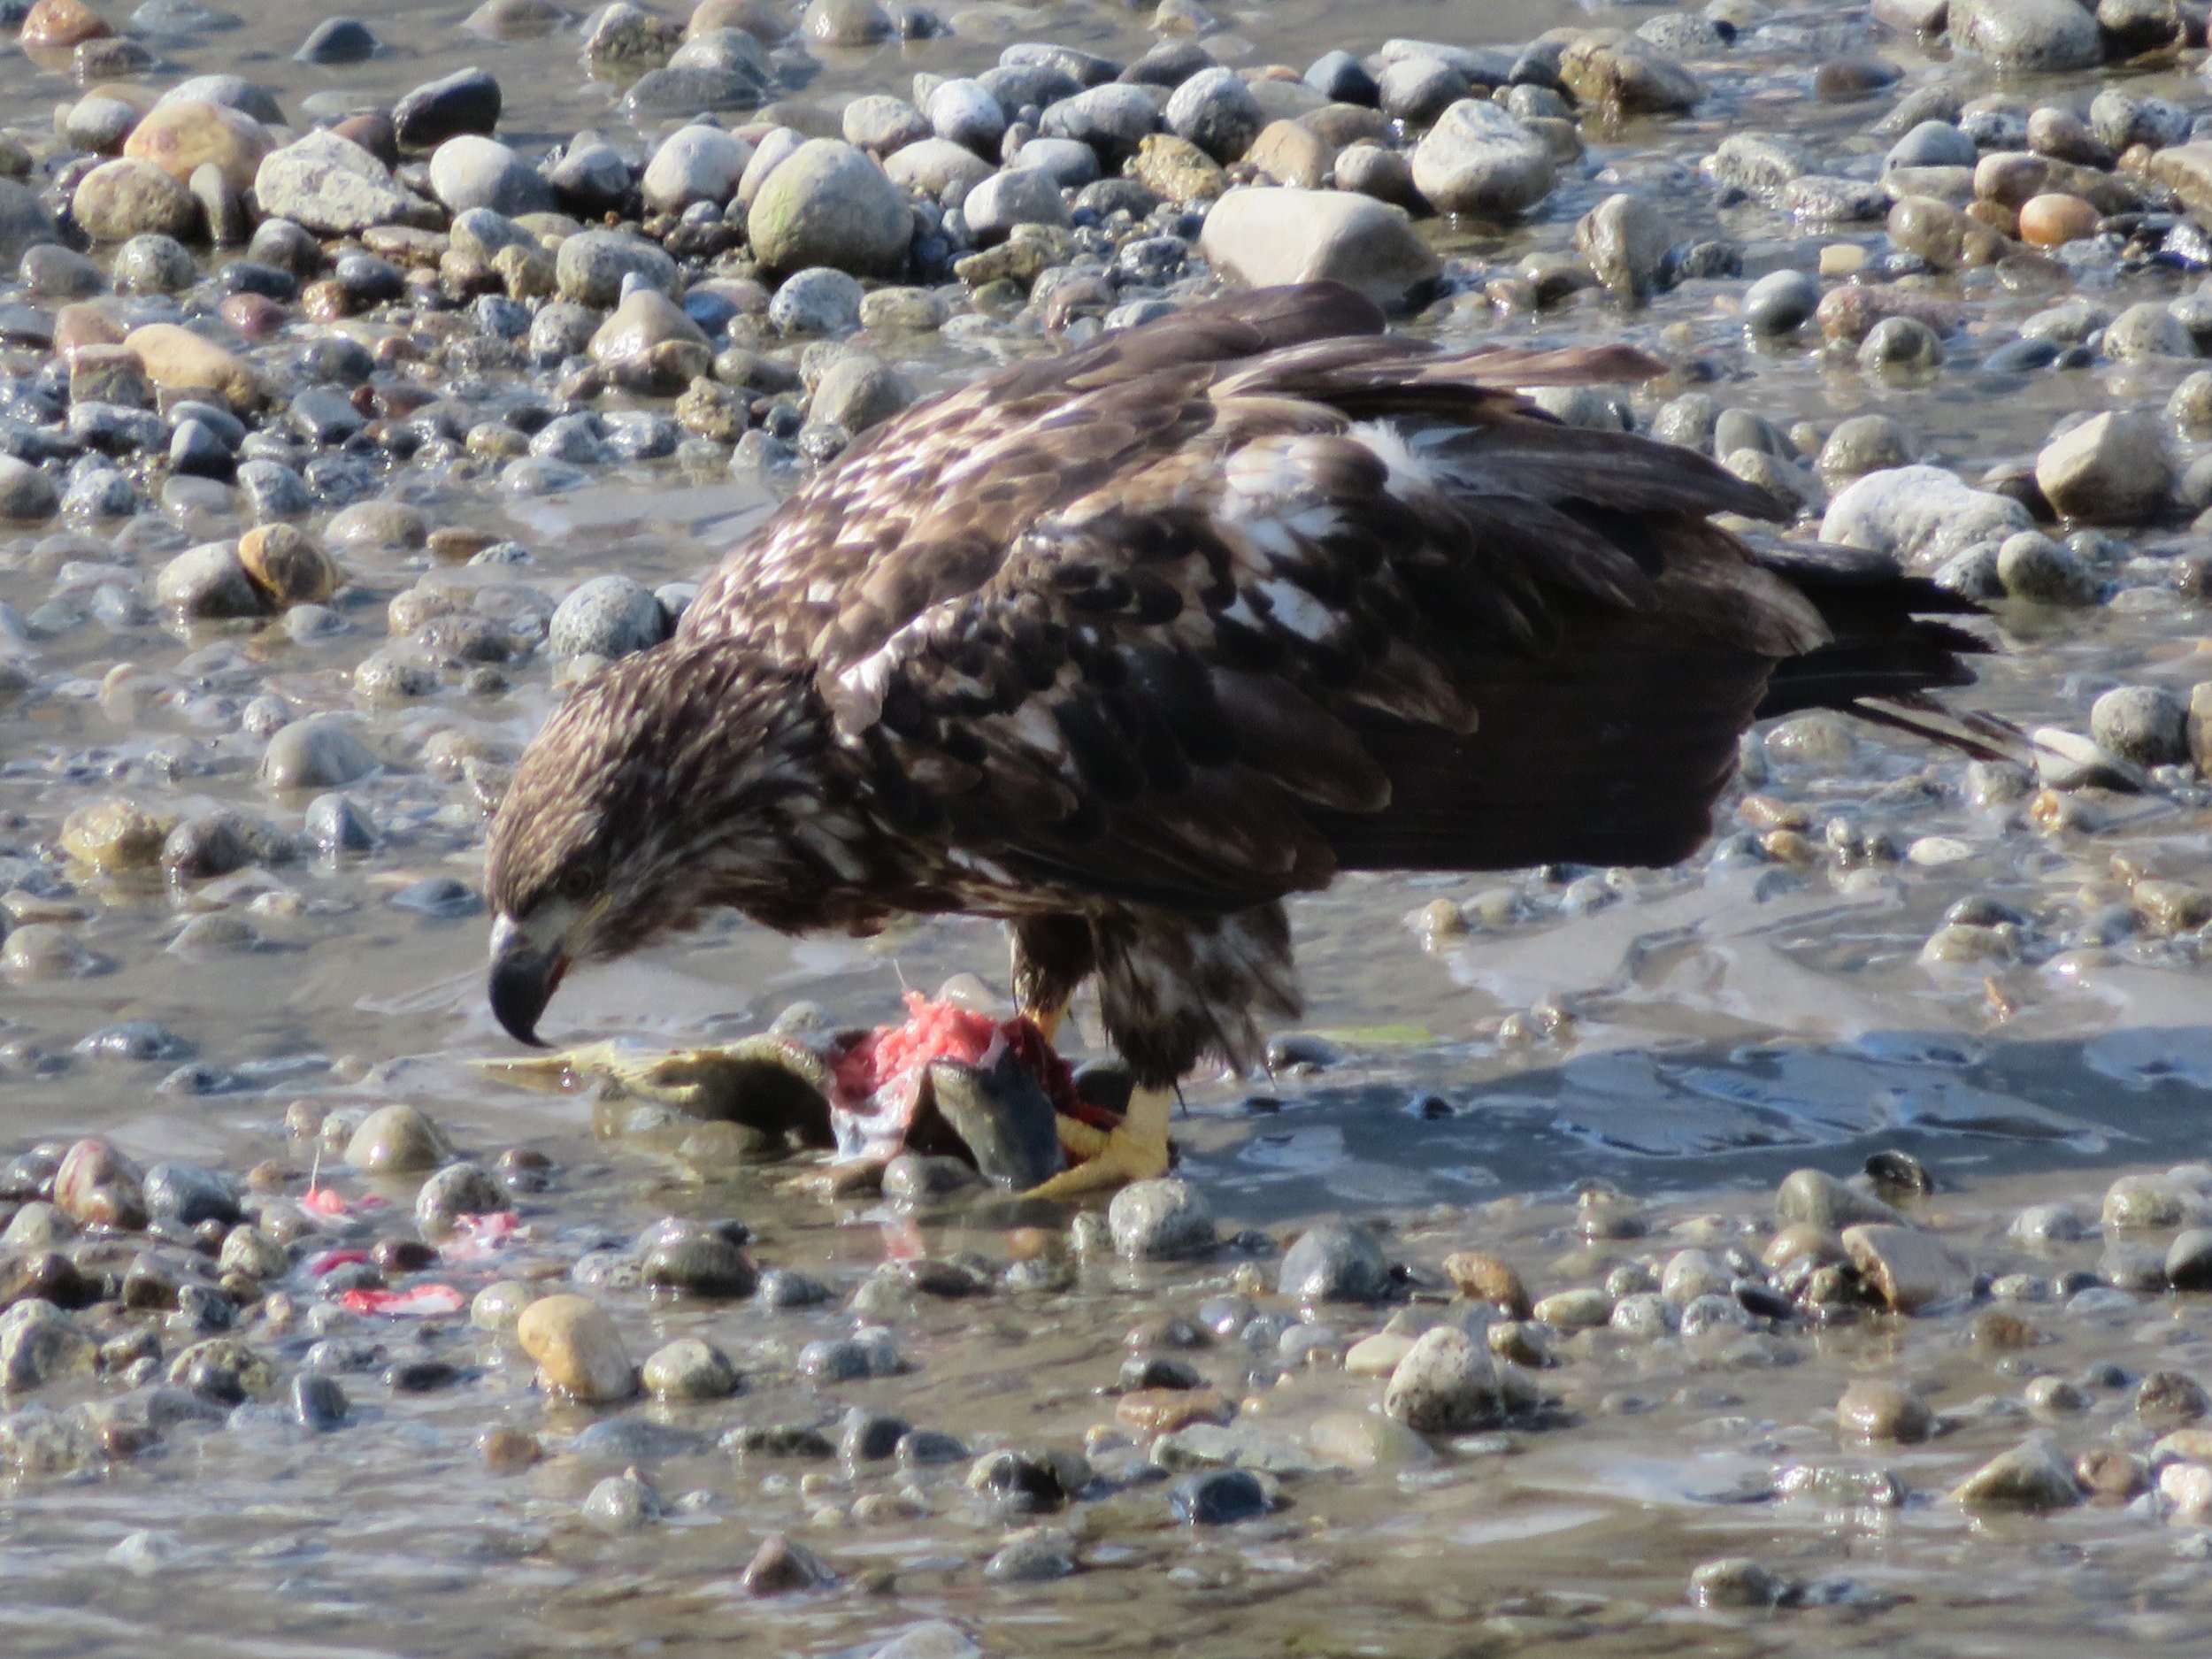 Dyea_golden eagle with fish.jpeg